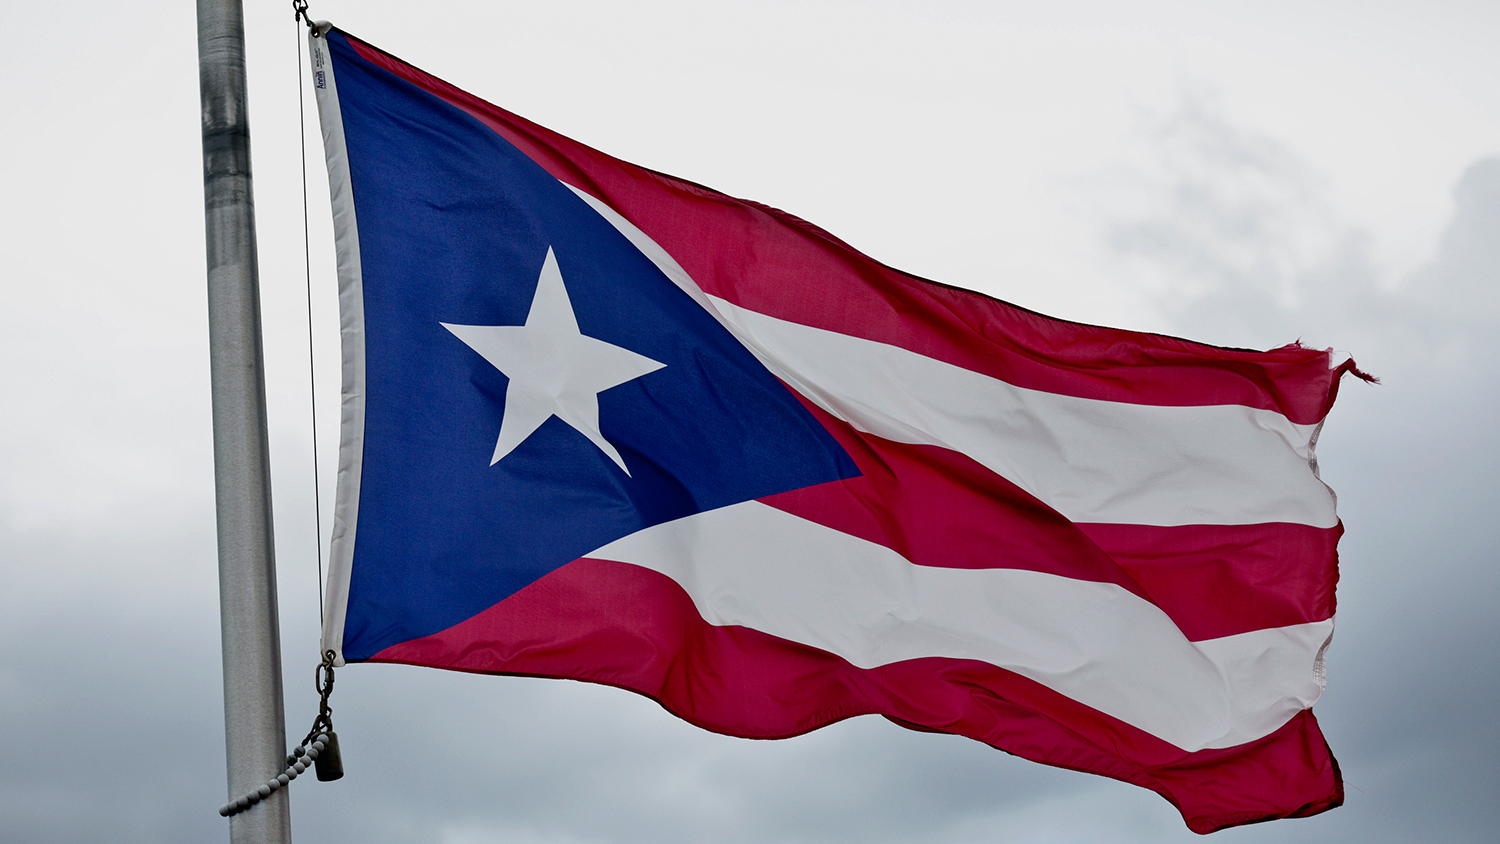 A Puerto Rican Flag flies in Old San Juan, Puerto Rico, on Tuesday, Aug. 18, 2015.
